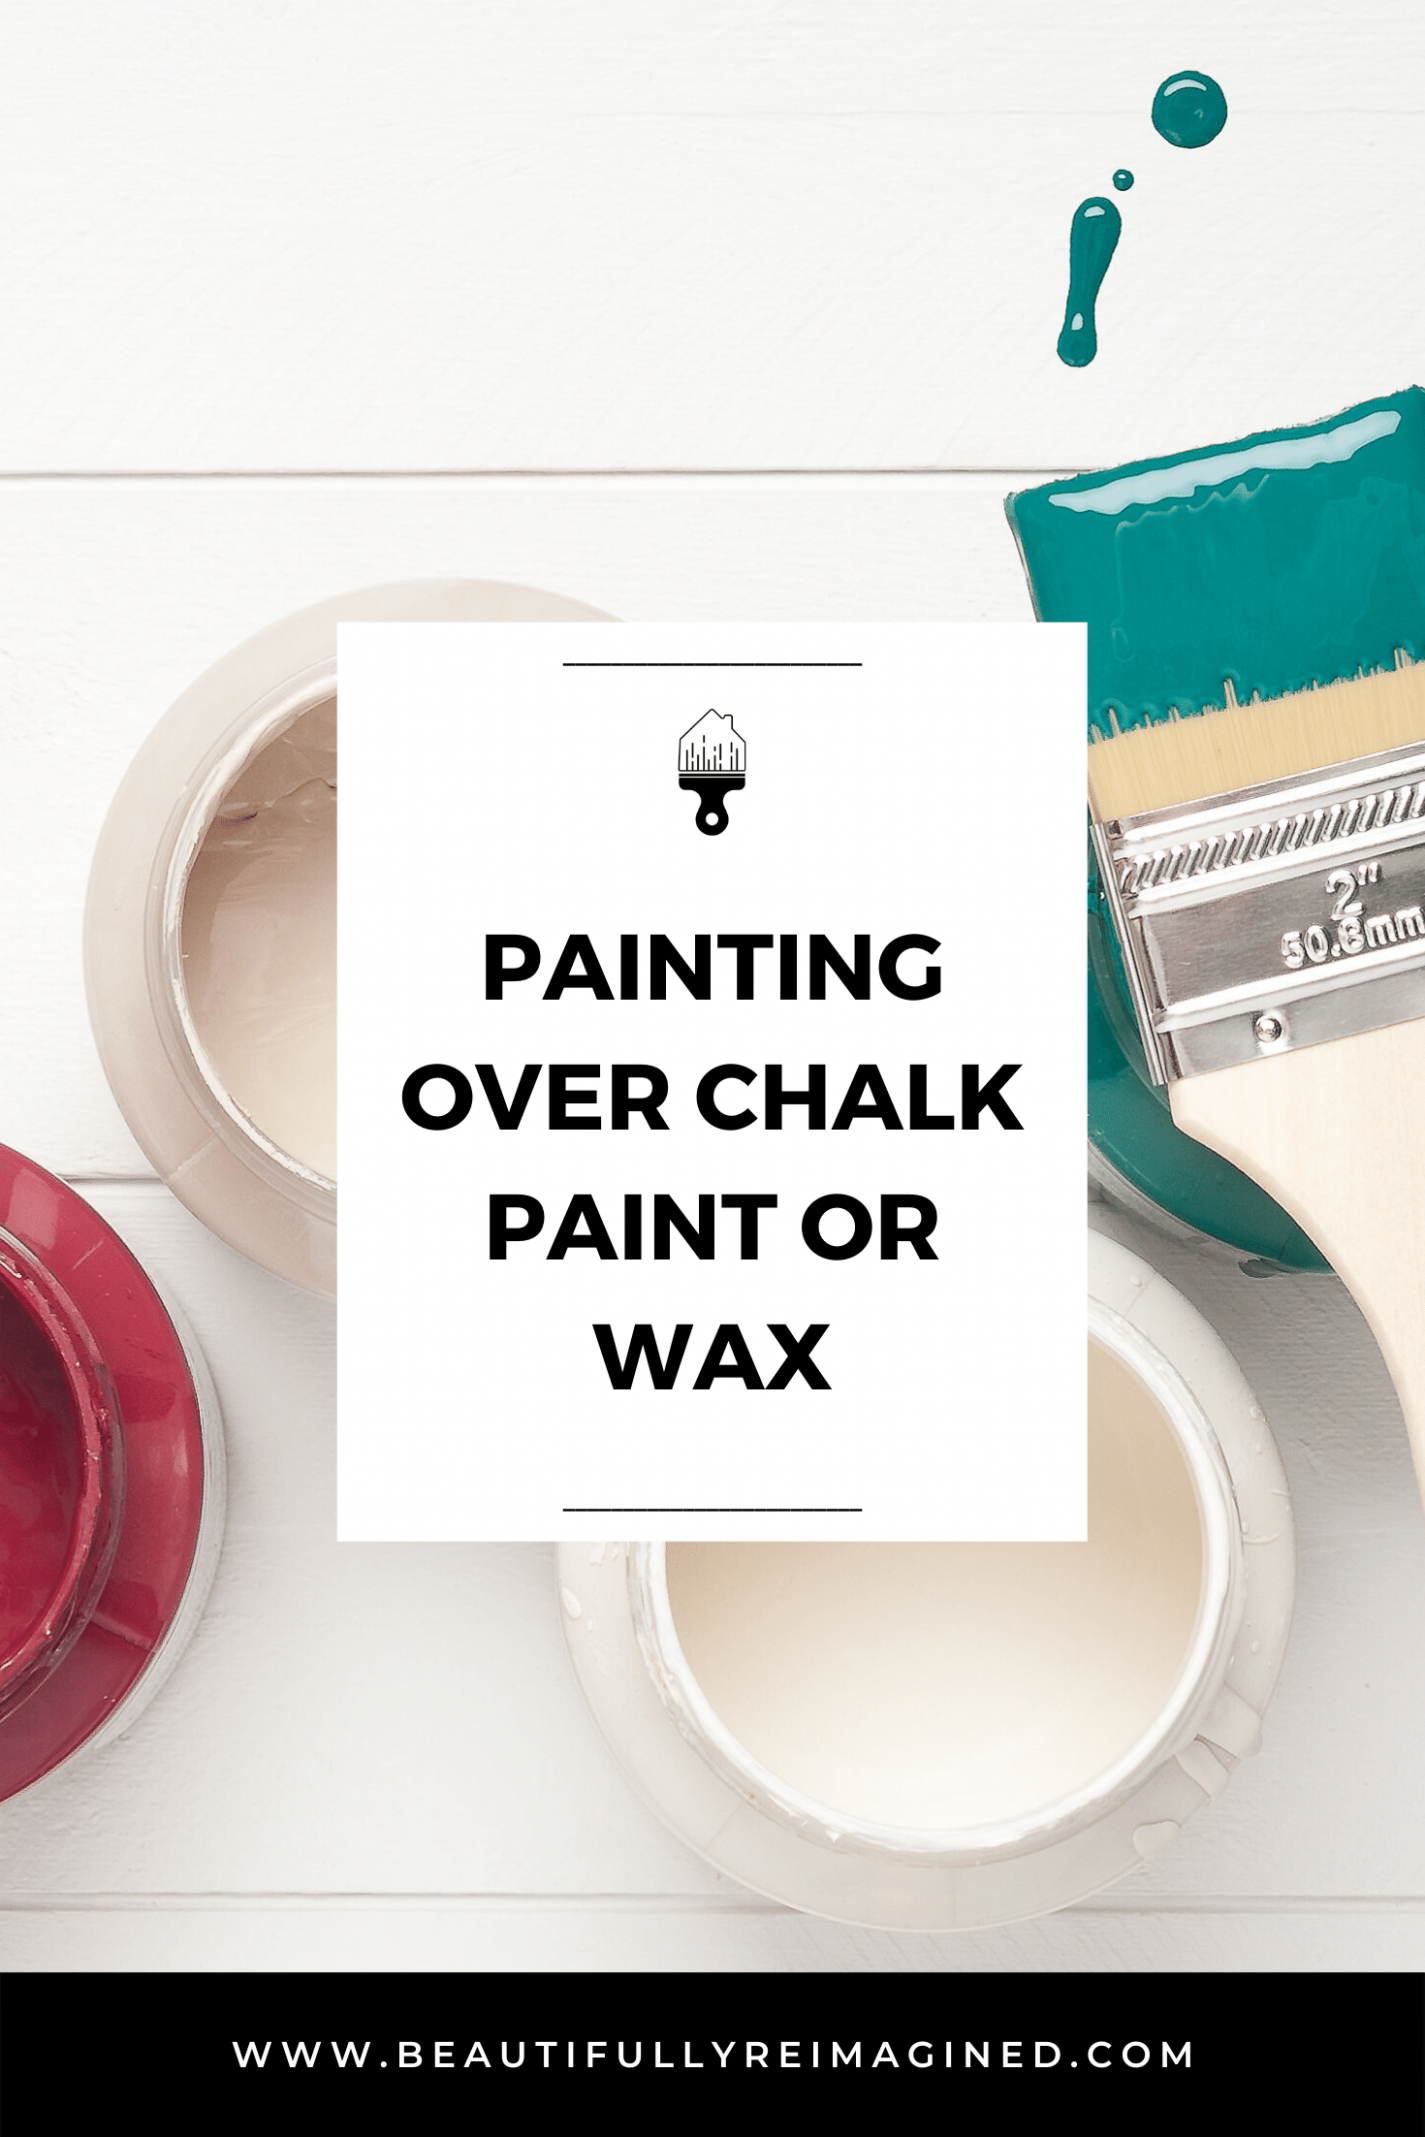 Painting Over Chalk Paint Or Wax | Beautifully Reimagined Can U Paint Over Chalk Paint With Latex